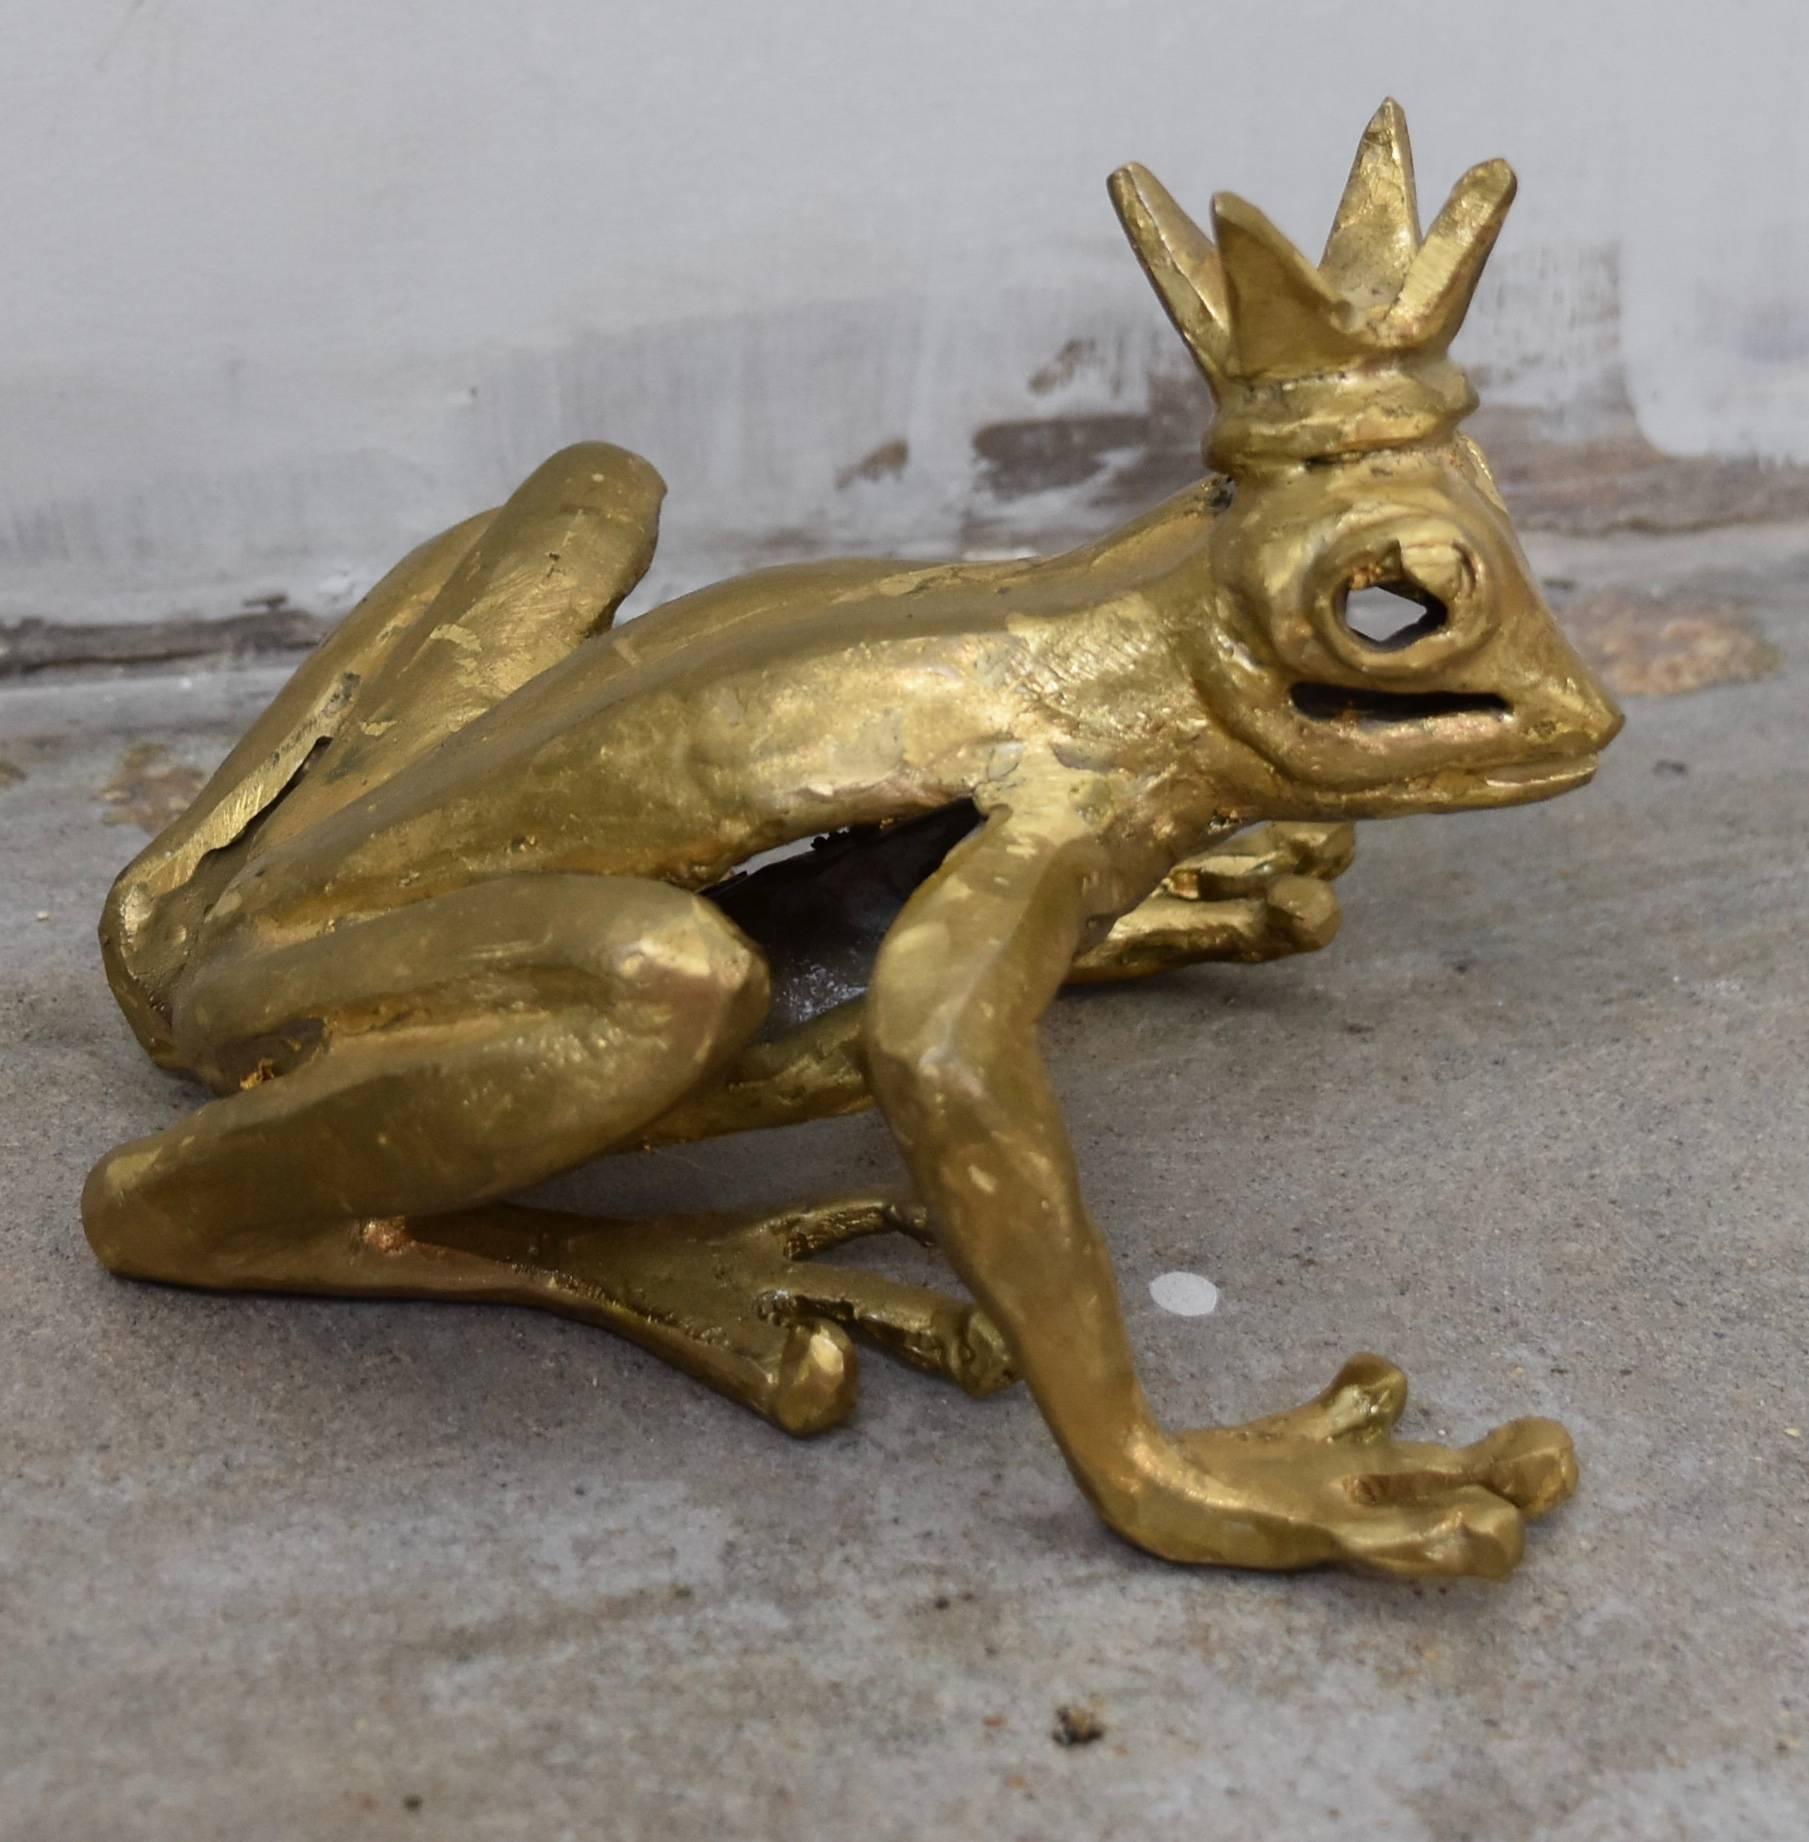 This lovely bronze frog was purchased at a castle in Belgium and done by artist
Sculptress Paula Swinnen. She is know for her bronze tables which I also carry. This was a trinket I just couldn't pass up.